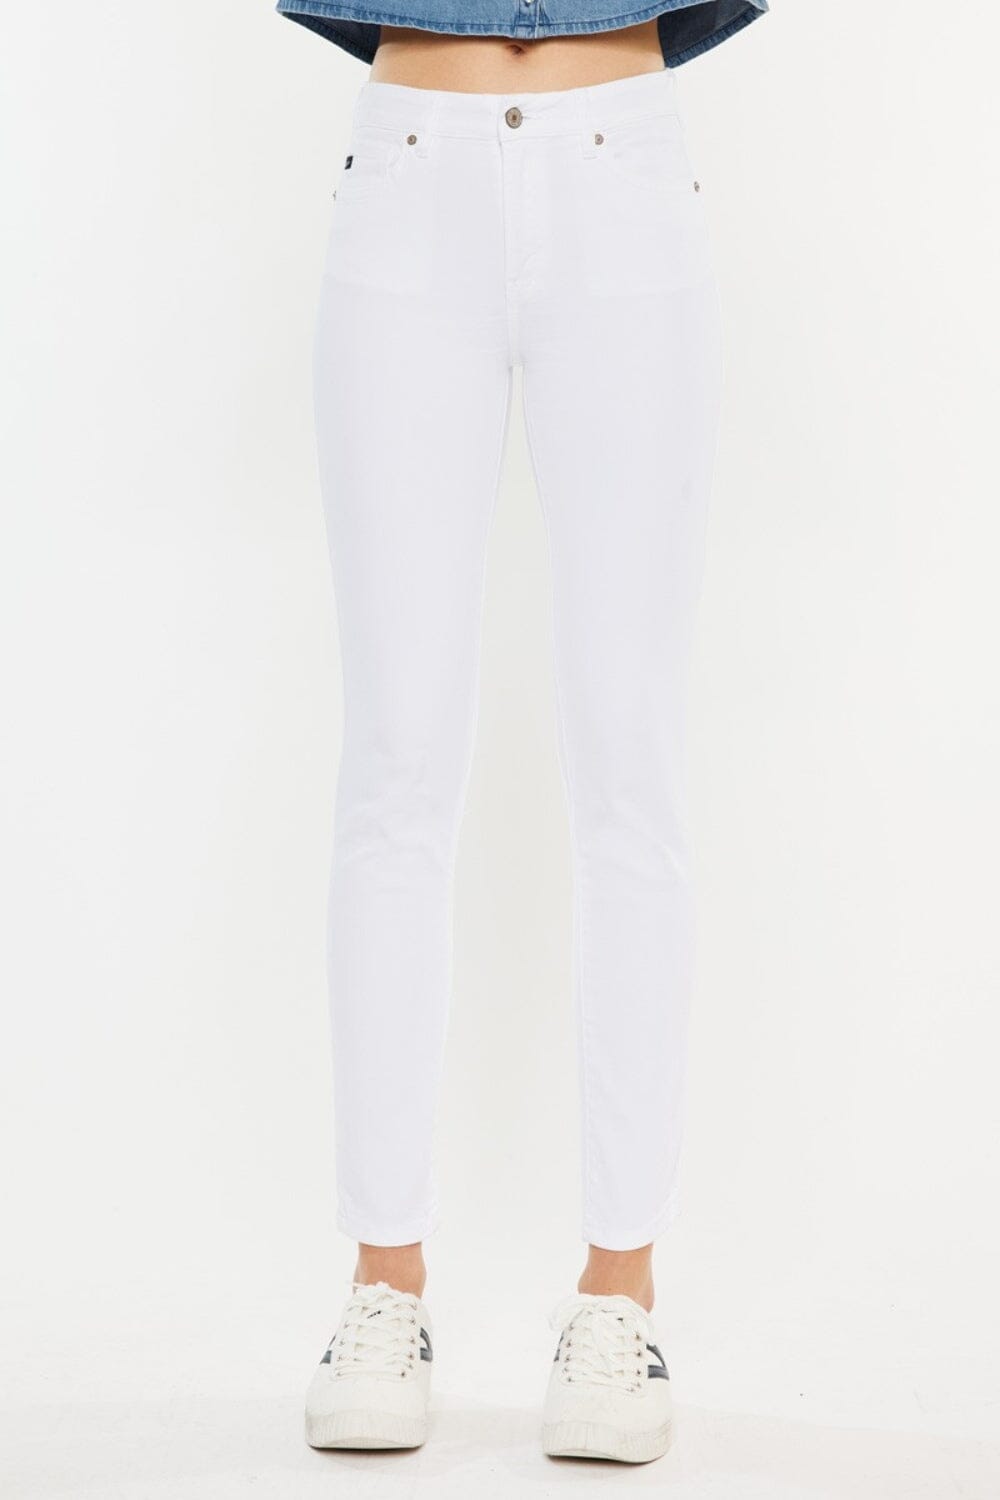 Kancan White High Rise Ankle Skinny Jeans jeans jehouze 